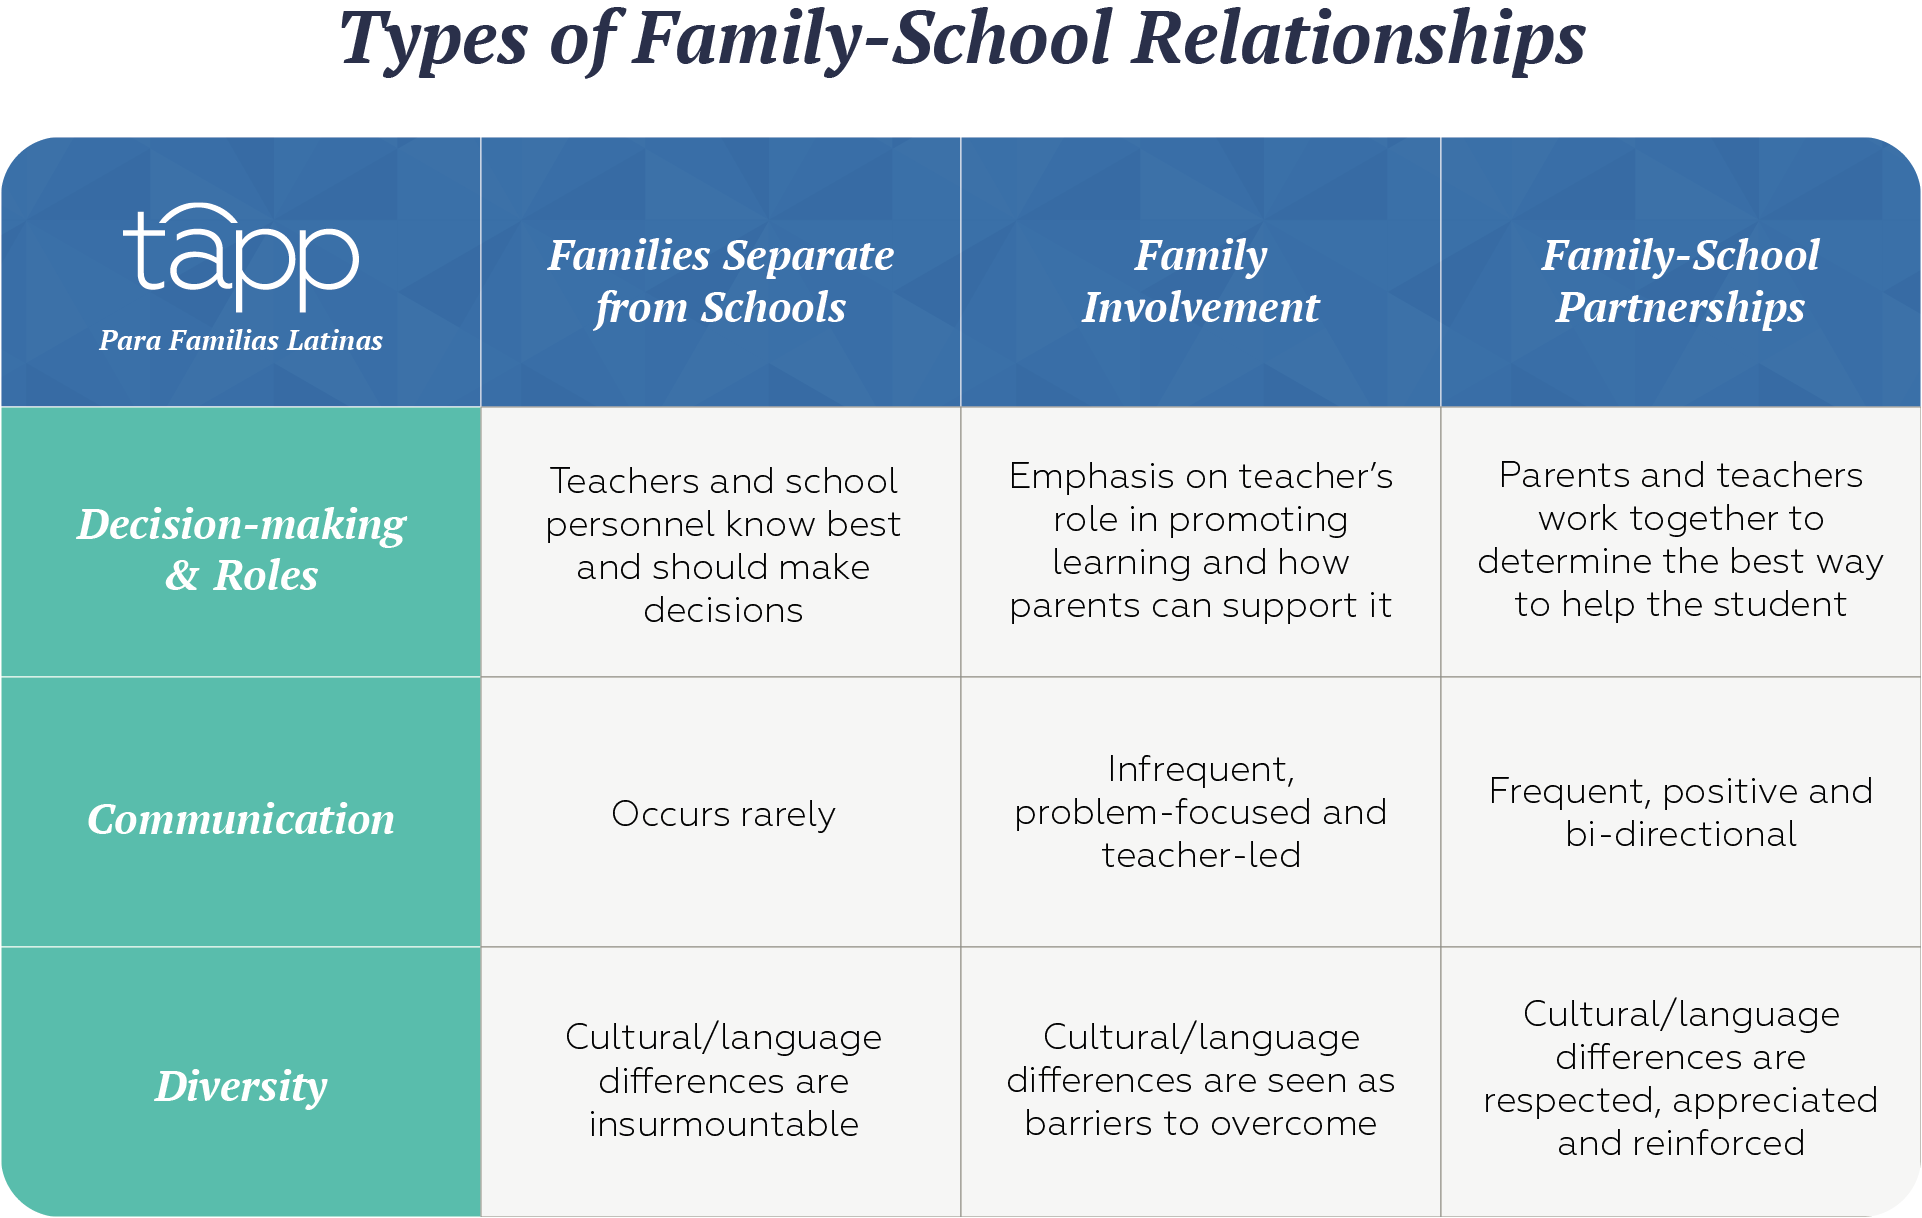 Types of Family-School Relationships